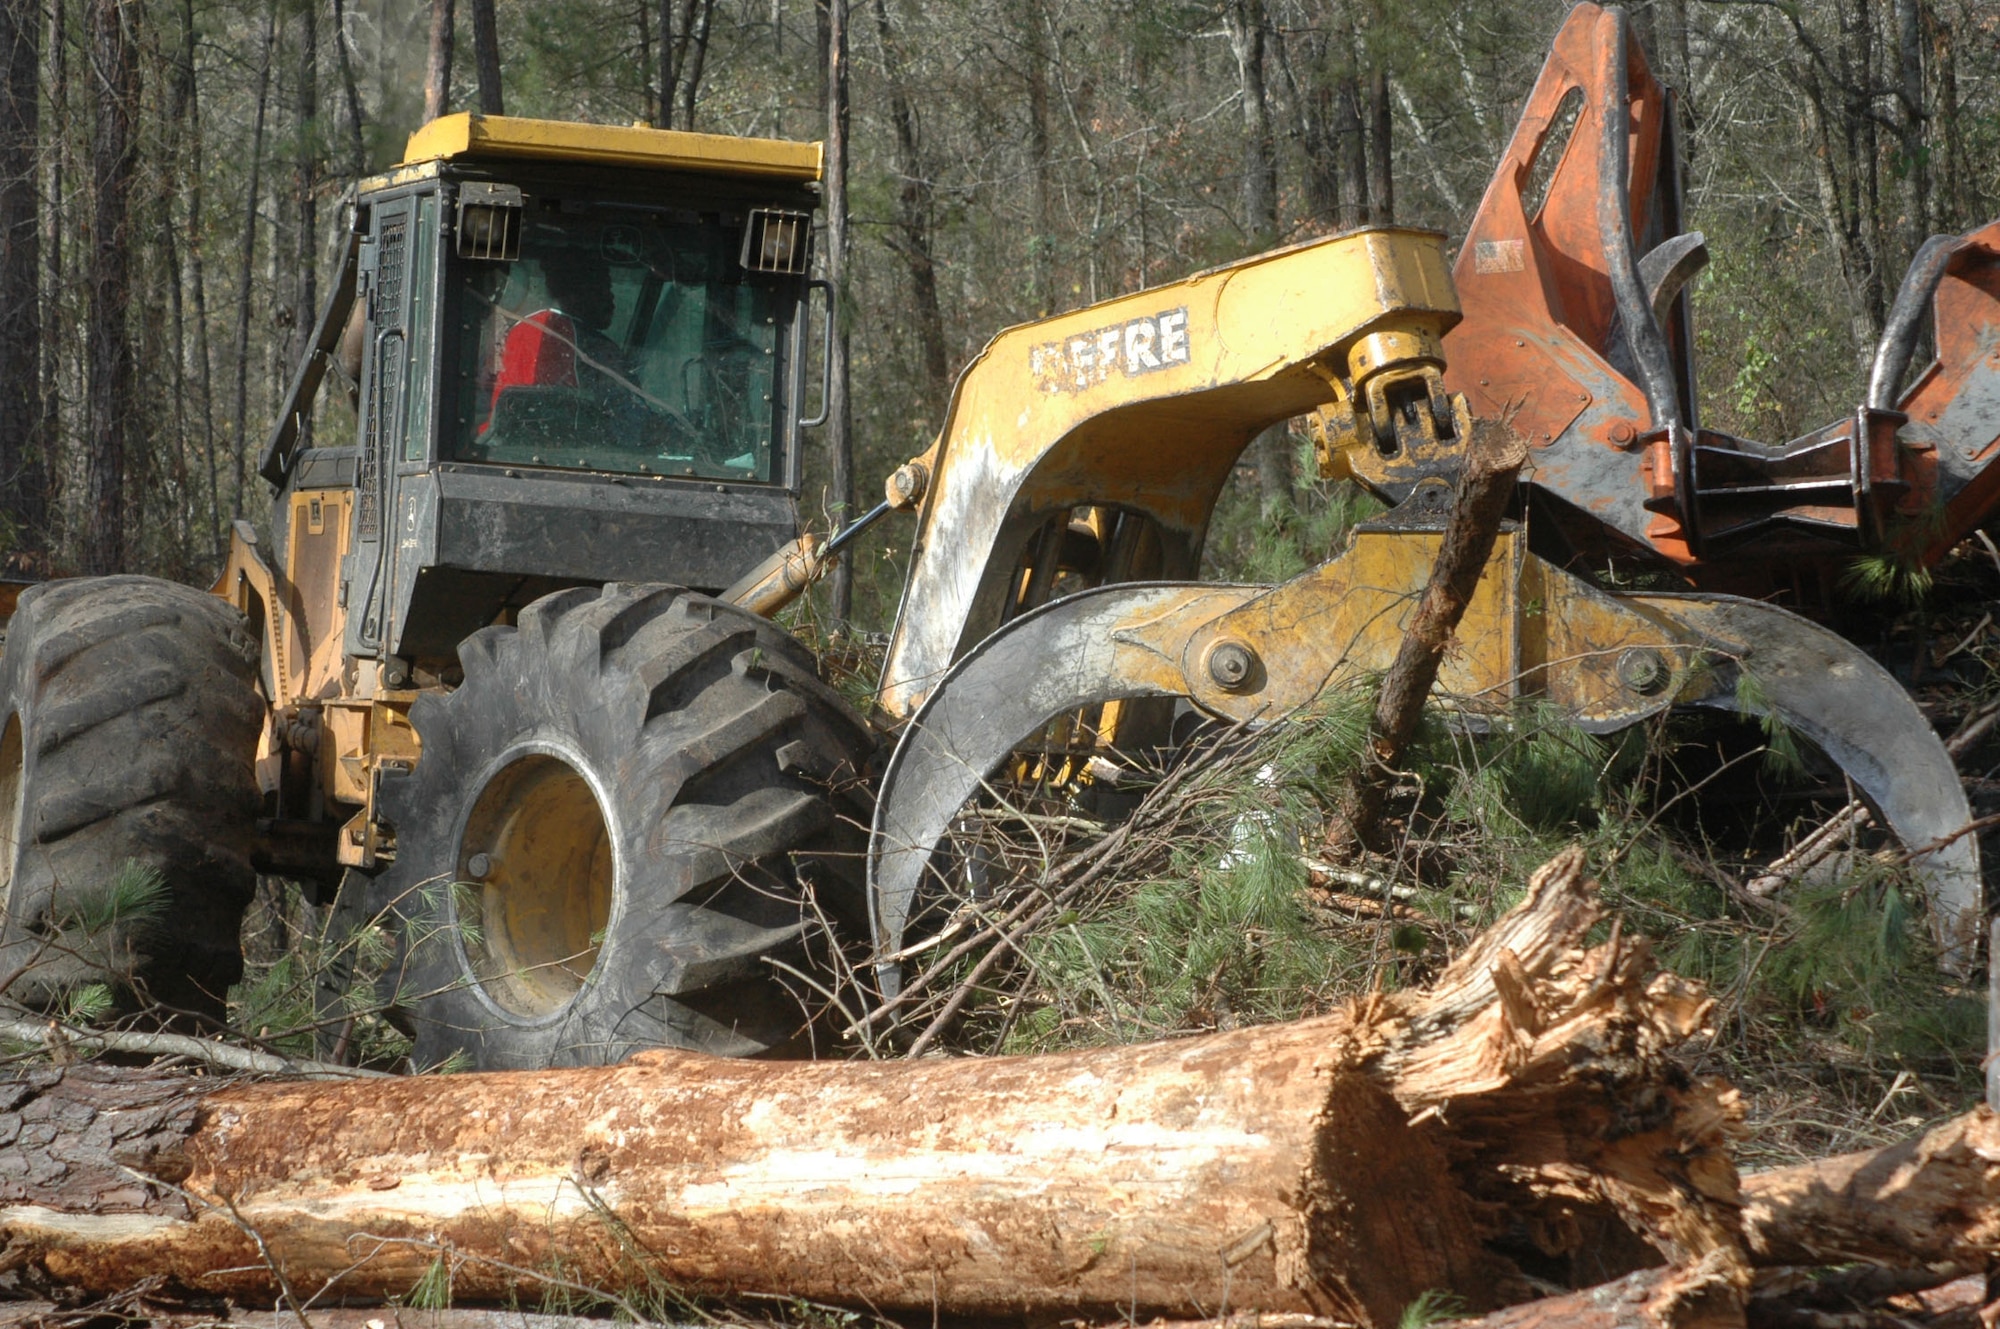 An area on the south end of Robins Air Force Base is designated as a Longleaf pine reforestation site. A skidder drags downed trees to be loaded and picks up debris. (U.S. Air Force photo by Sue Sapp)